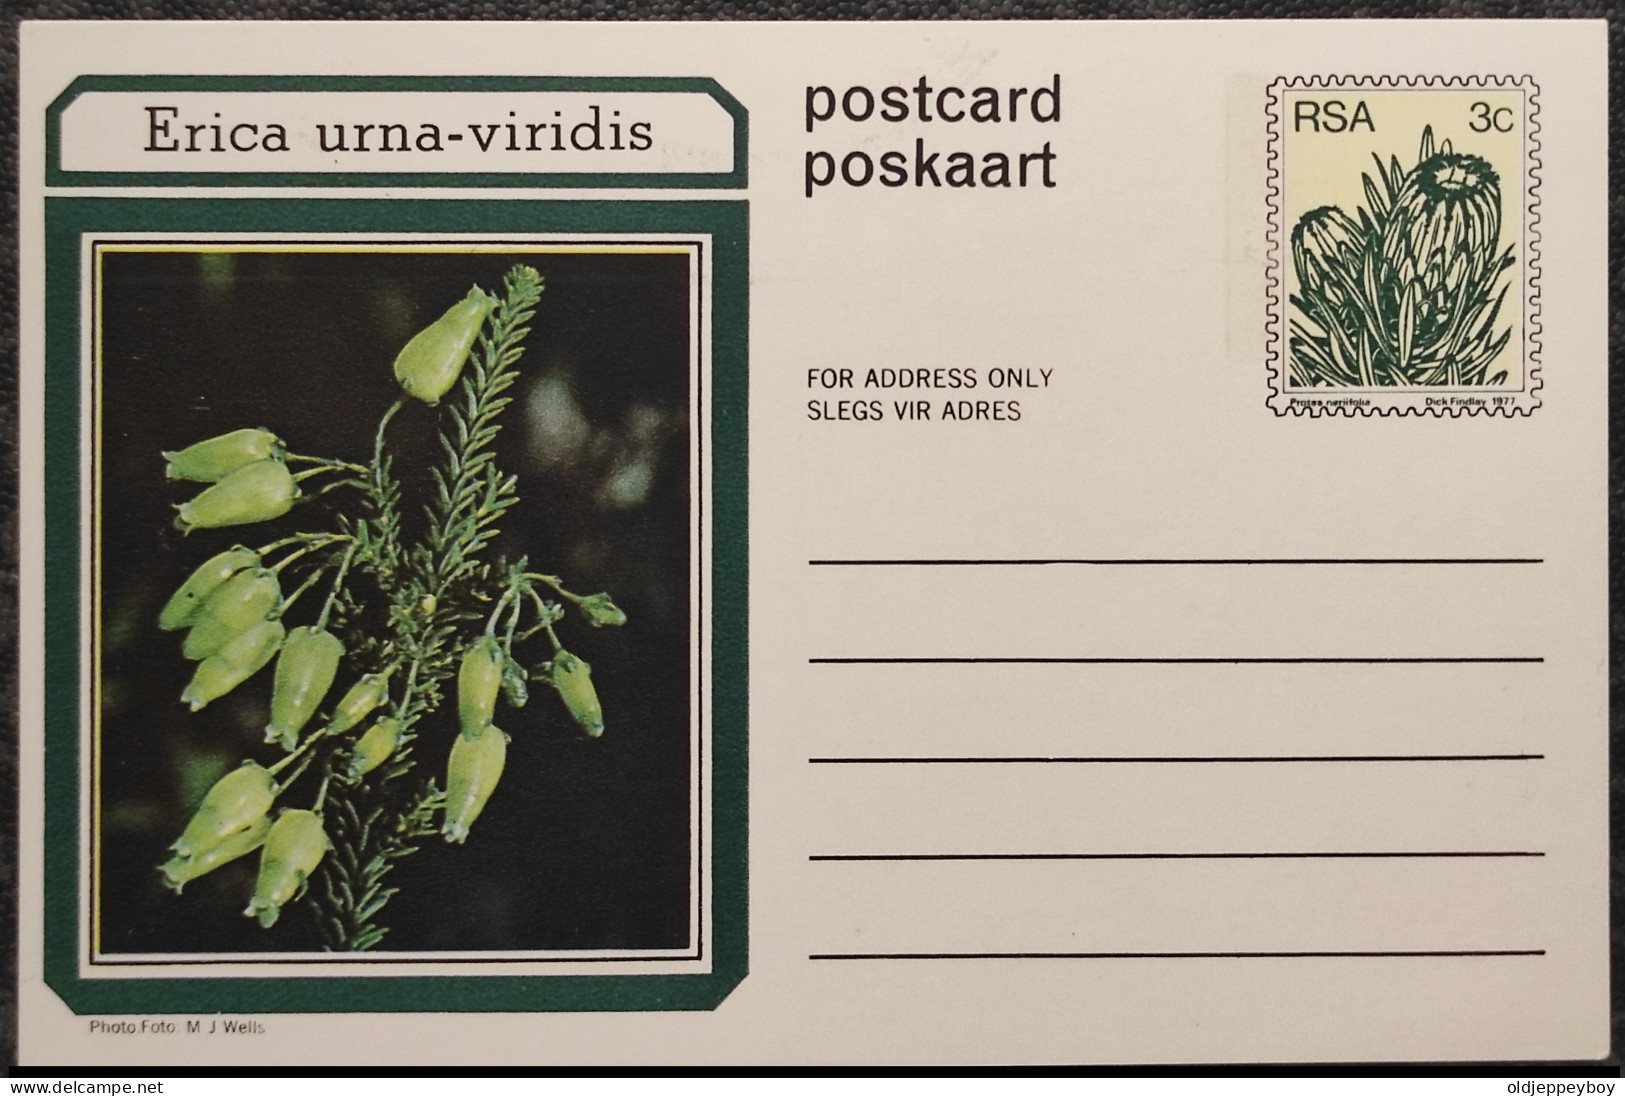 8c SOUTH AFRICA Postal STATIONERY CARD Illus ERICA URNA VIRIDIS FLOWER Cover Stamps Flowers Rsa - Lettres & Documents